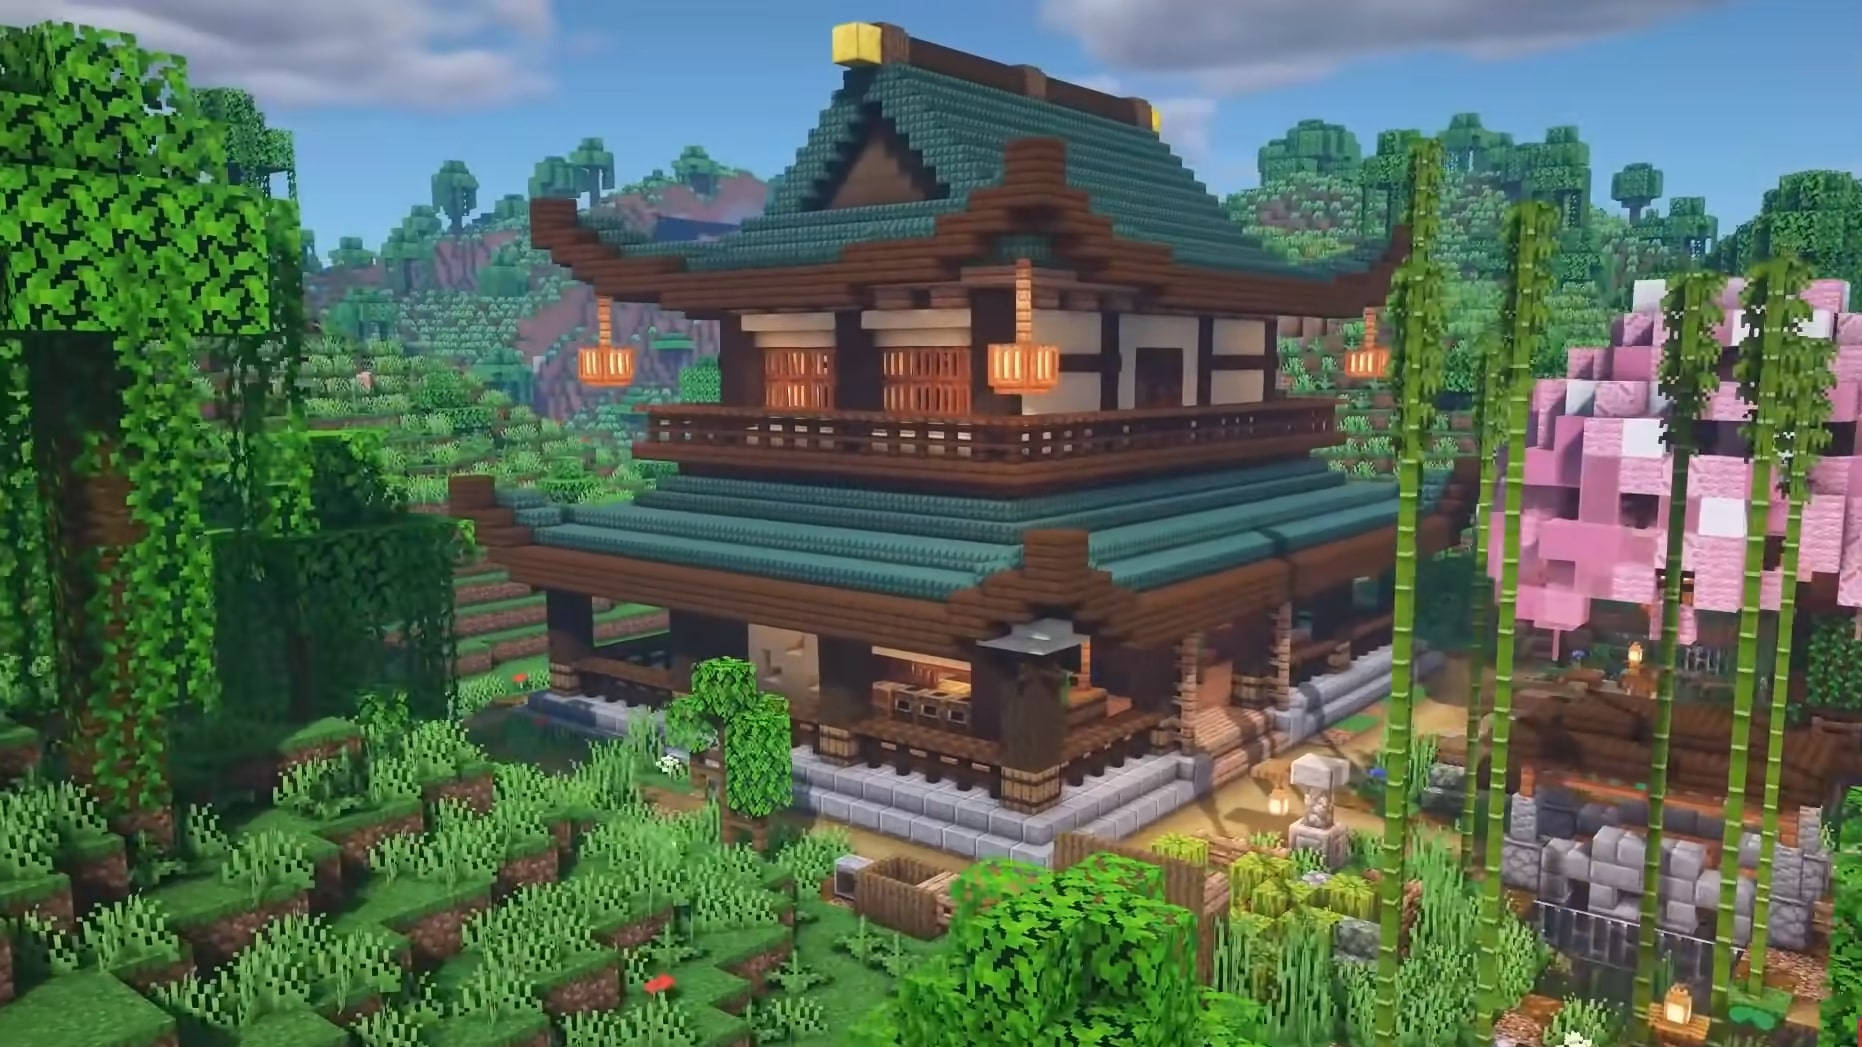 Beautiful Minecraft Traditional Japanese House Wallpaper